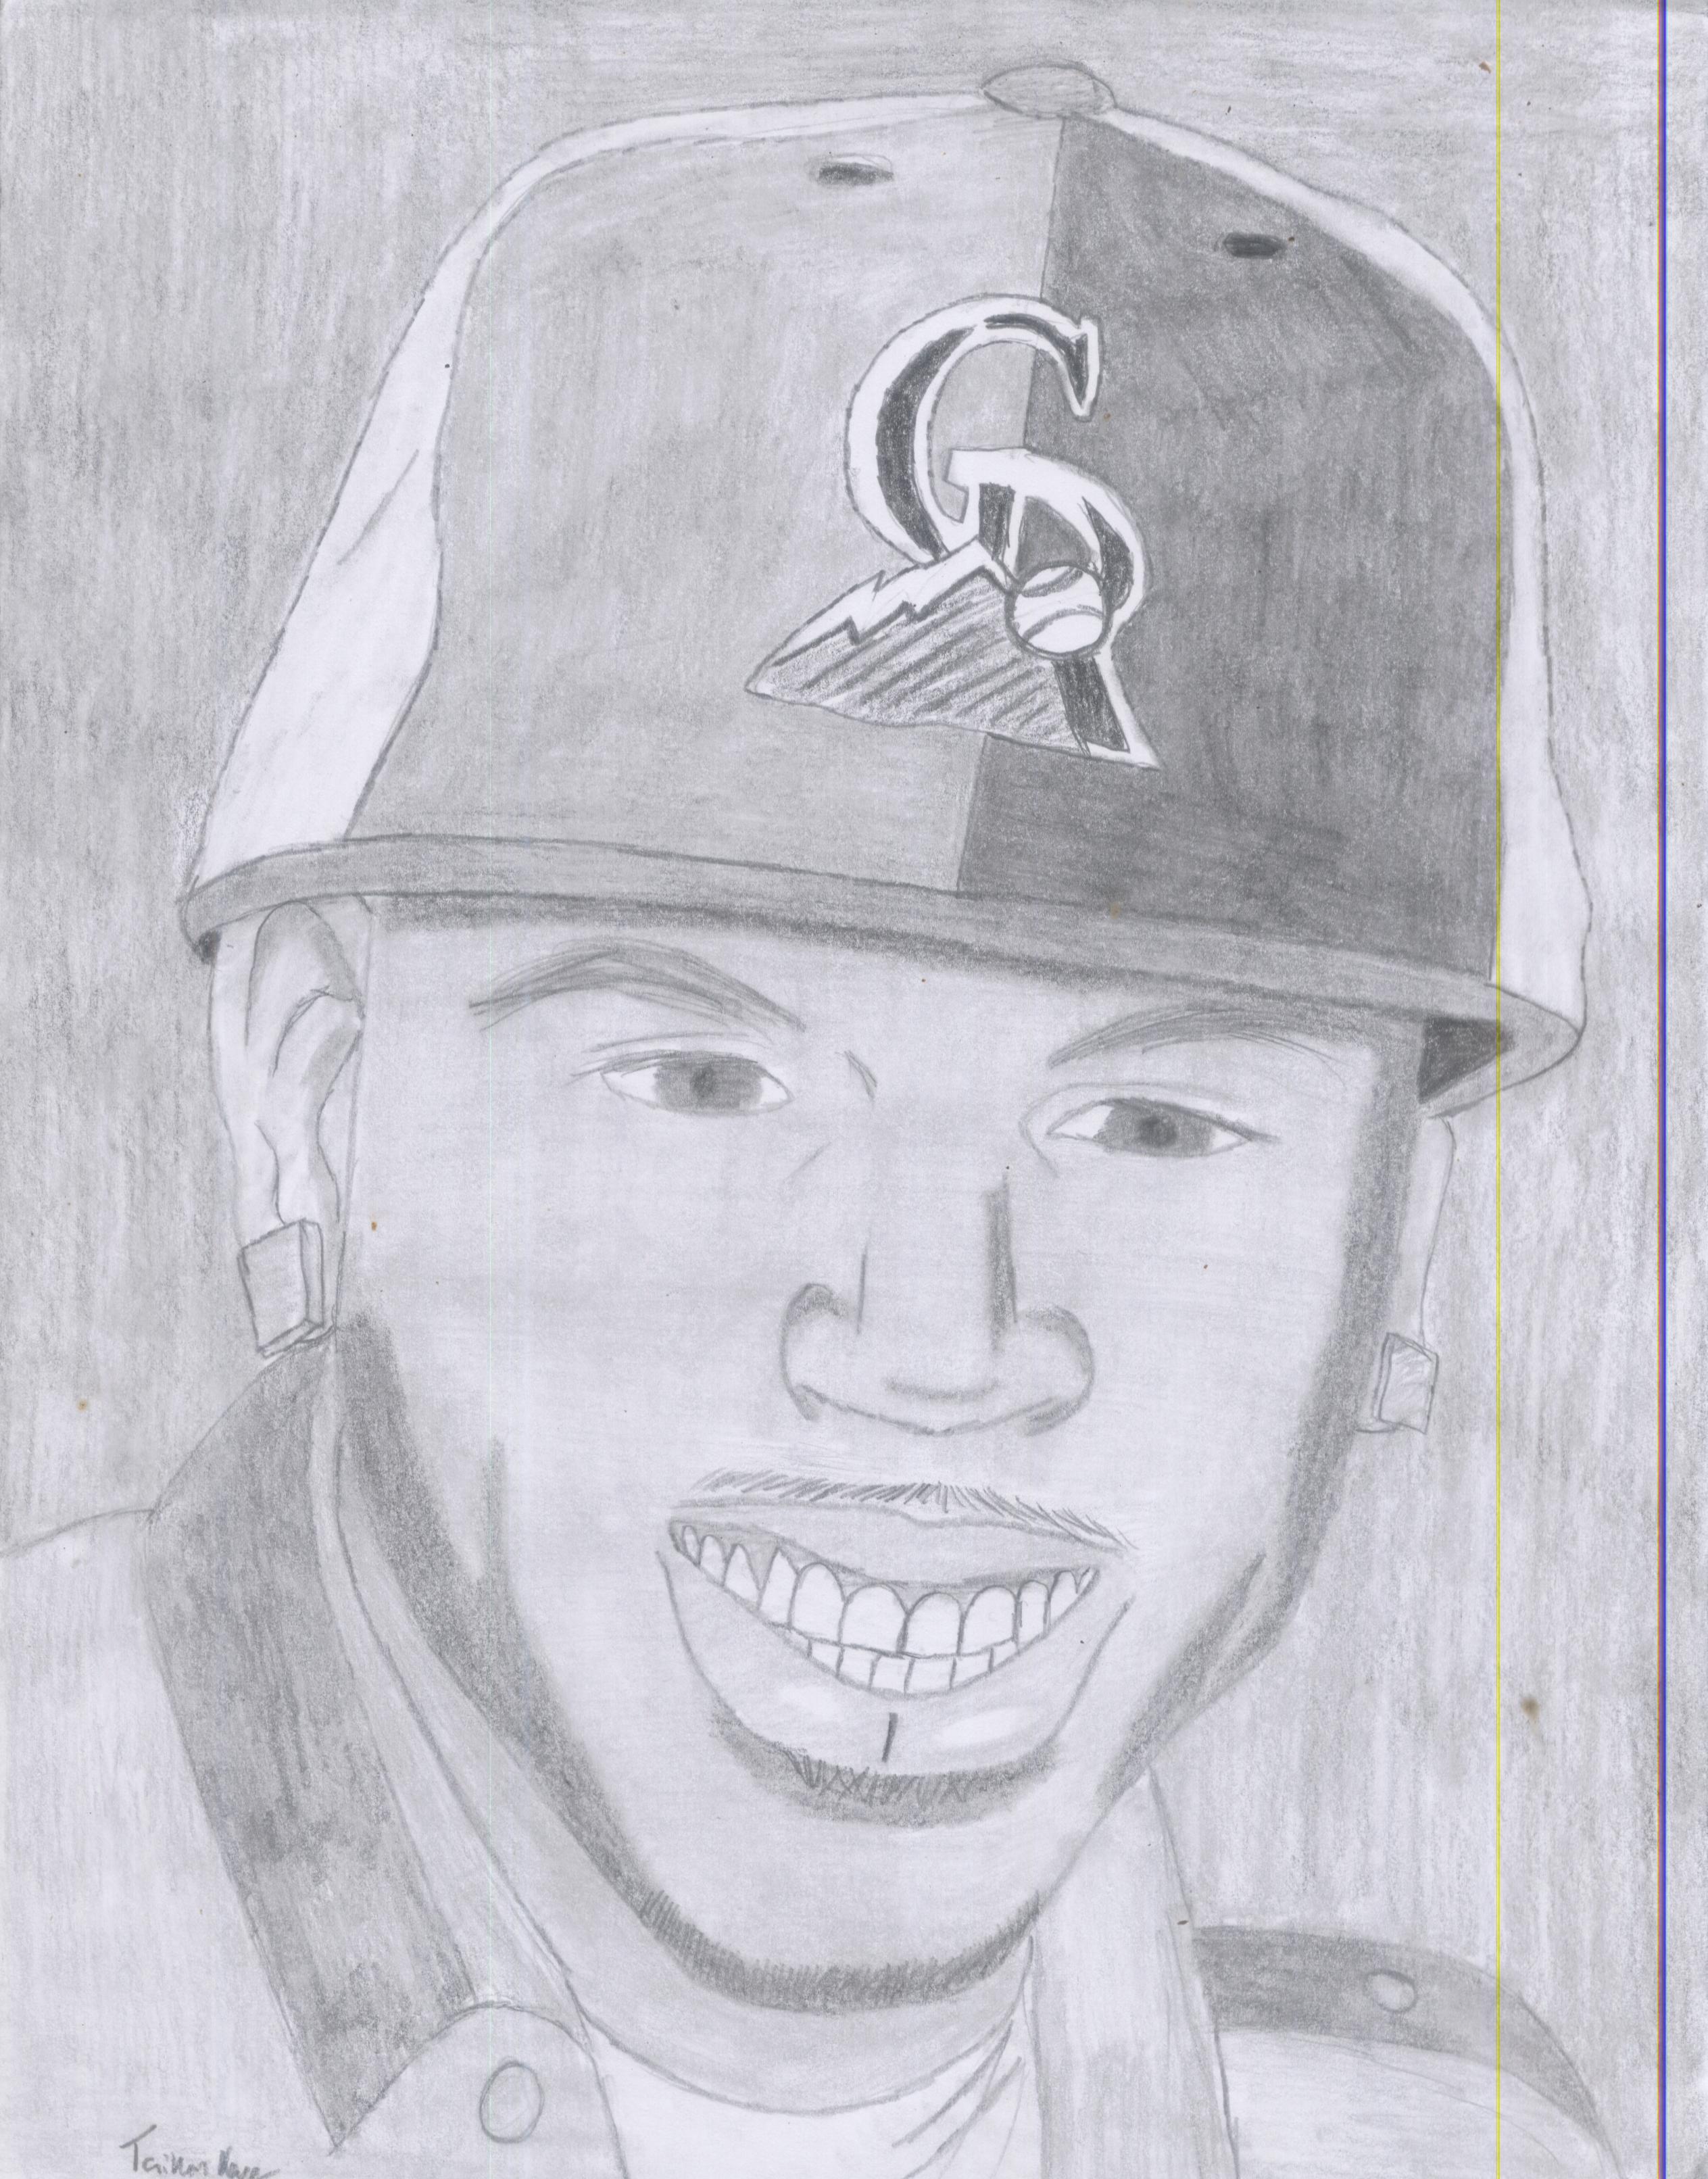 Chris Brown portrait by loves_all_anime_manga_and_game